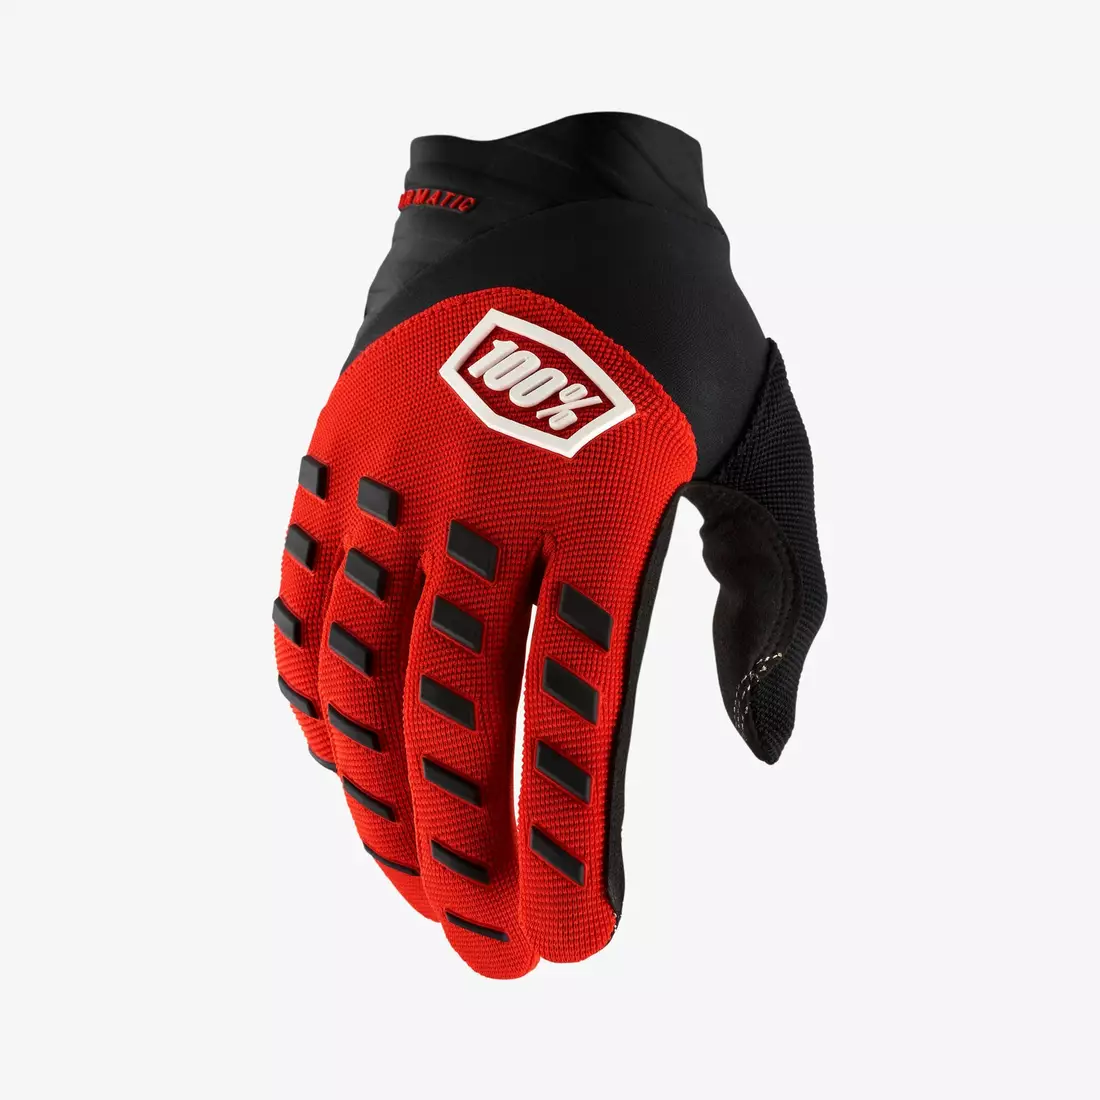 100% AIRMATIC Cycling gloves, black and red